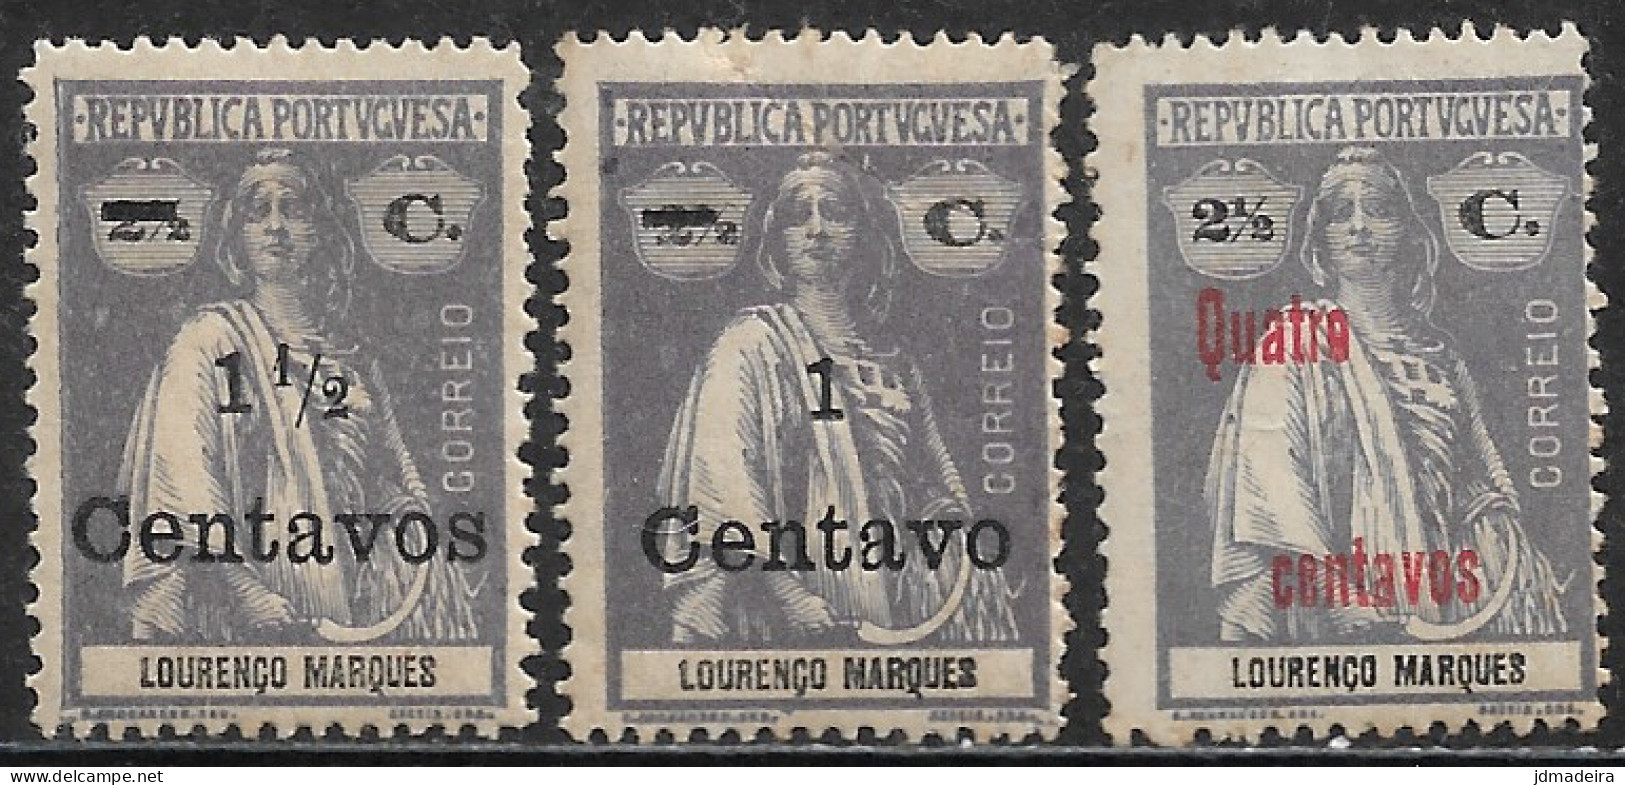 Lourenco Marques – 1920 Ceres Type Surcharged Mint Set - Lourenzo Marques